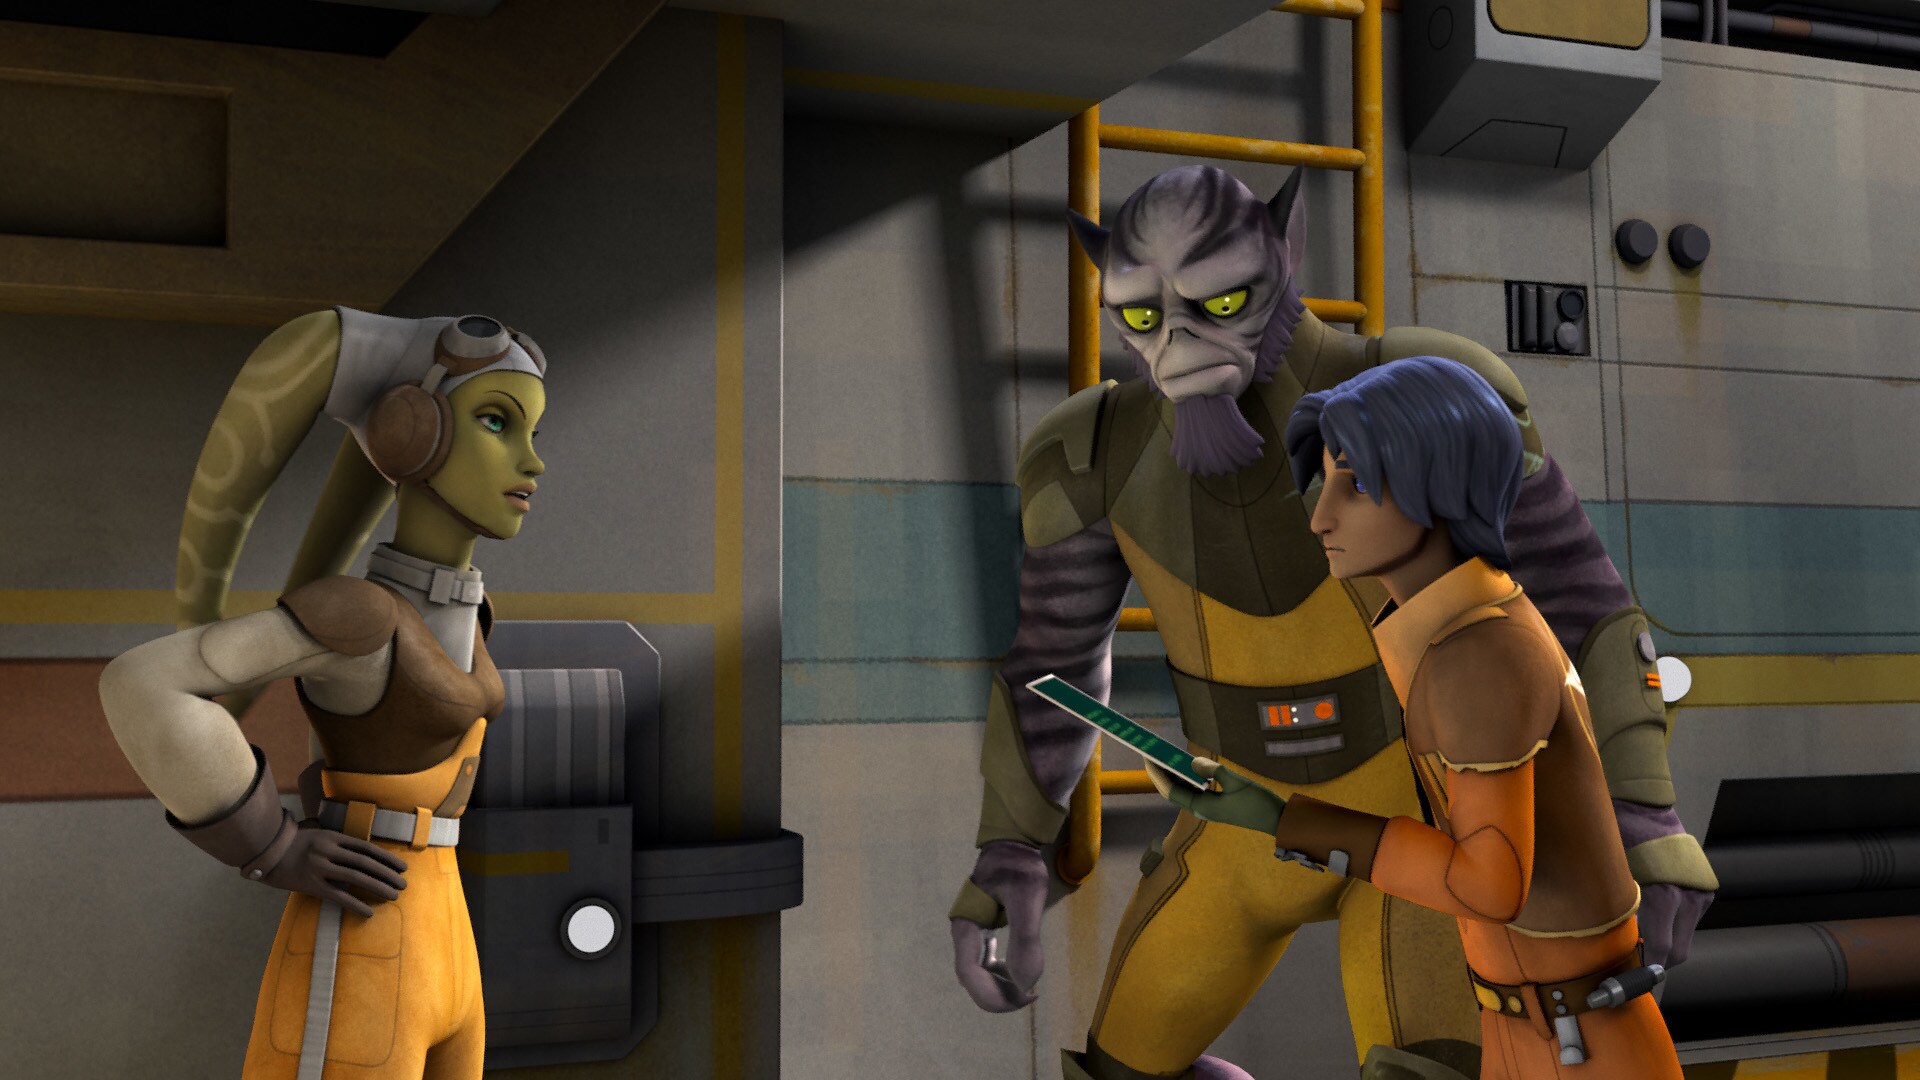 Finally, Hera puts a stop to the bickering. "Enough," she says. "This is my ship you're wrecking,...